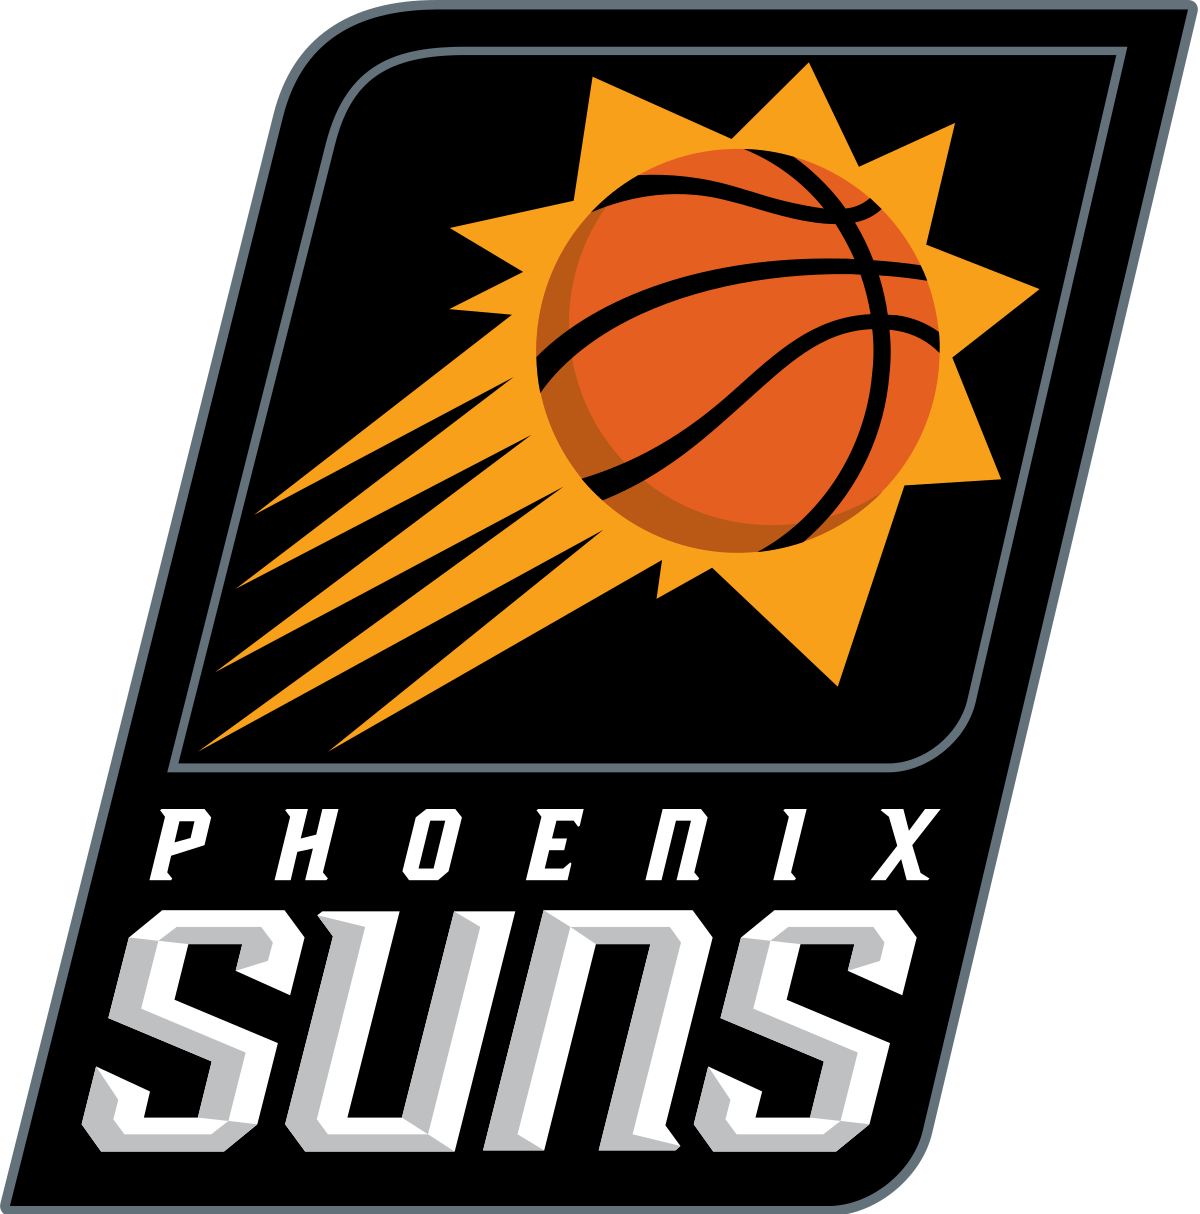 NBA Bookie News: Phoenix Suns Clinches Top Seed in Playoffs